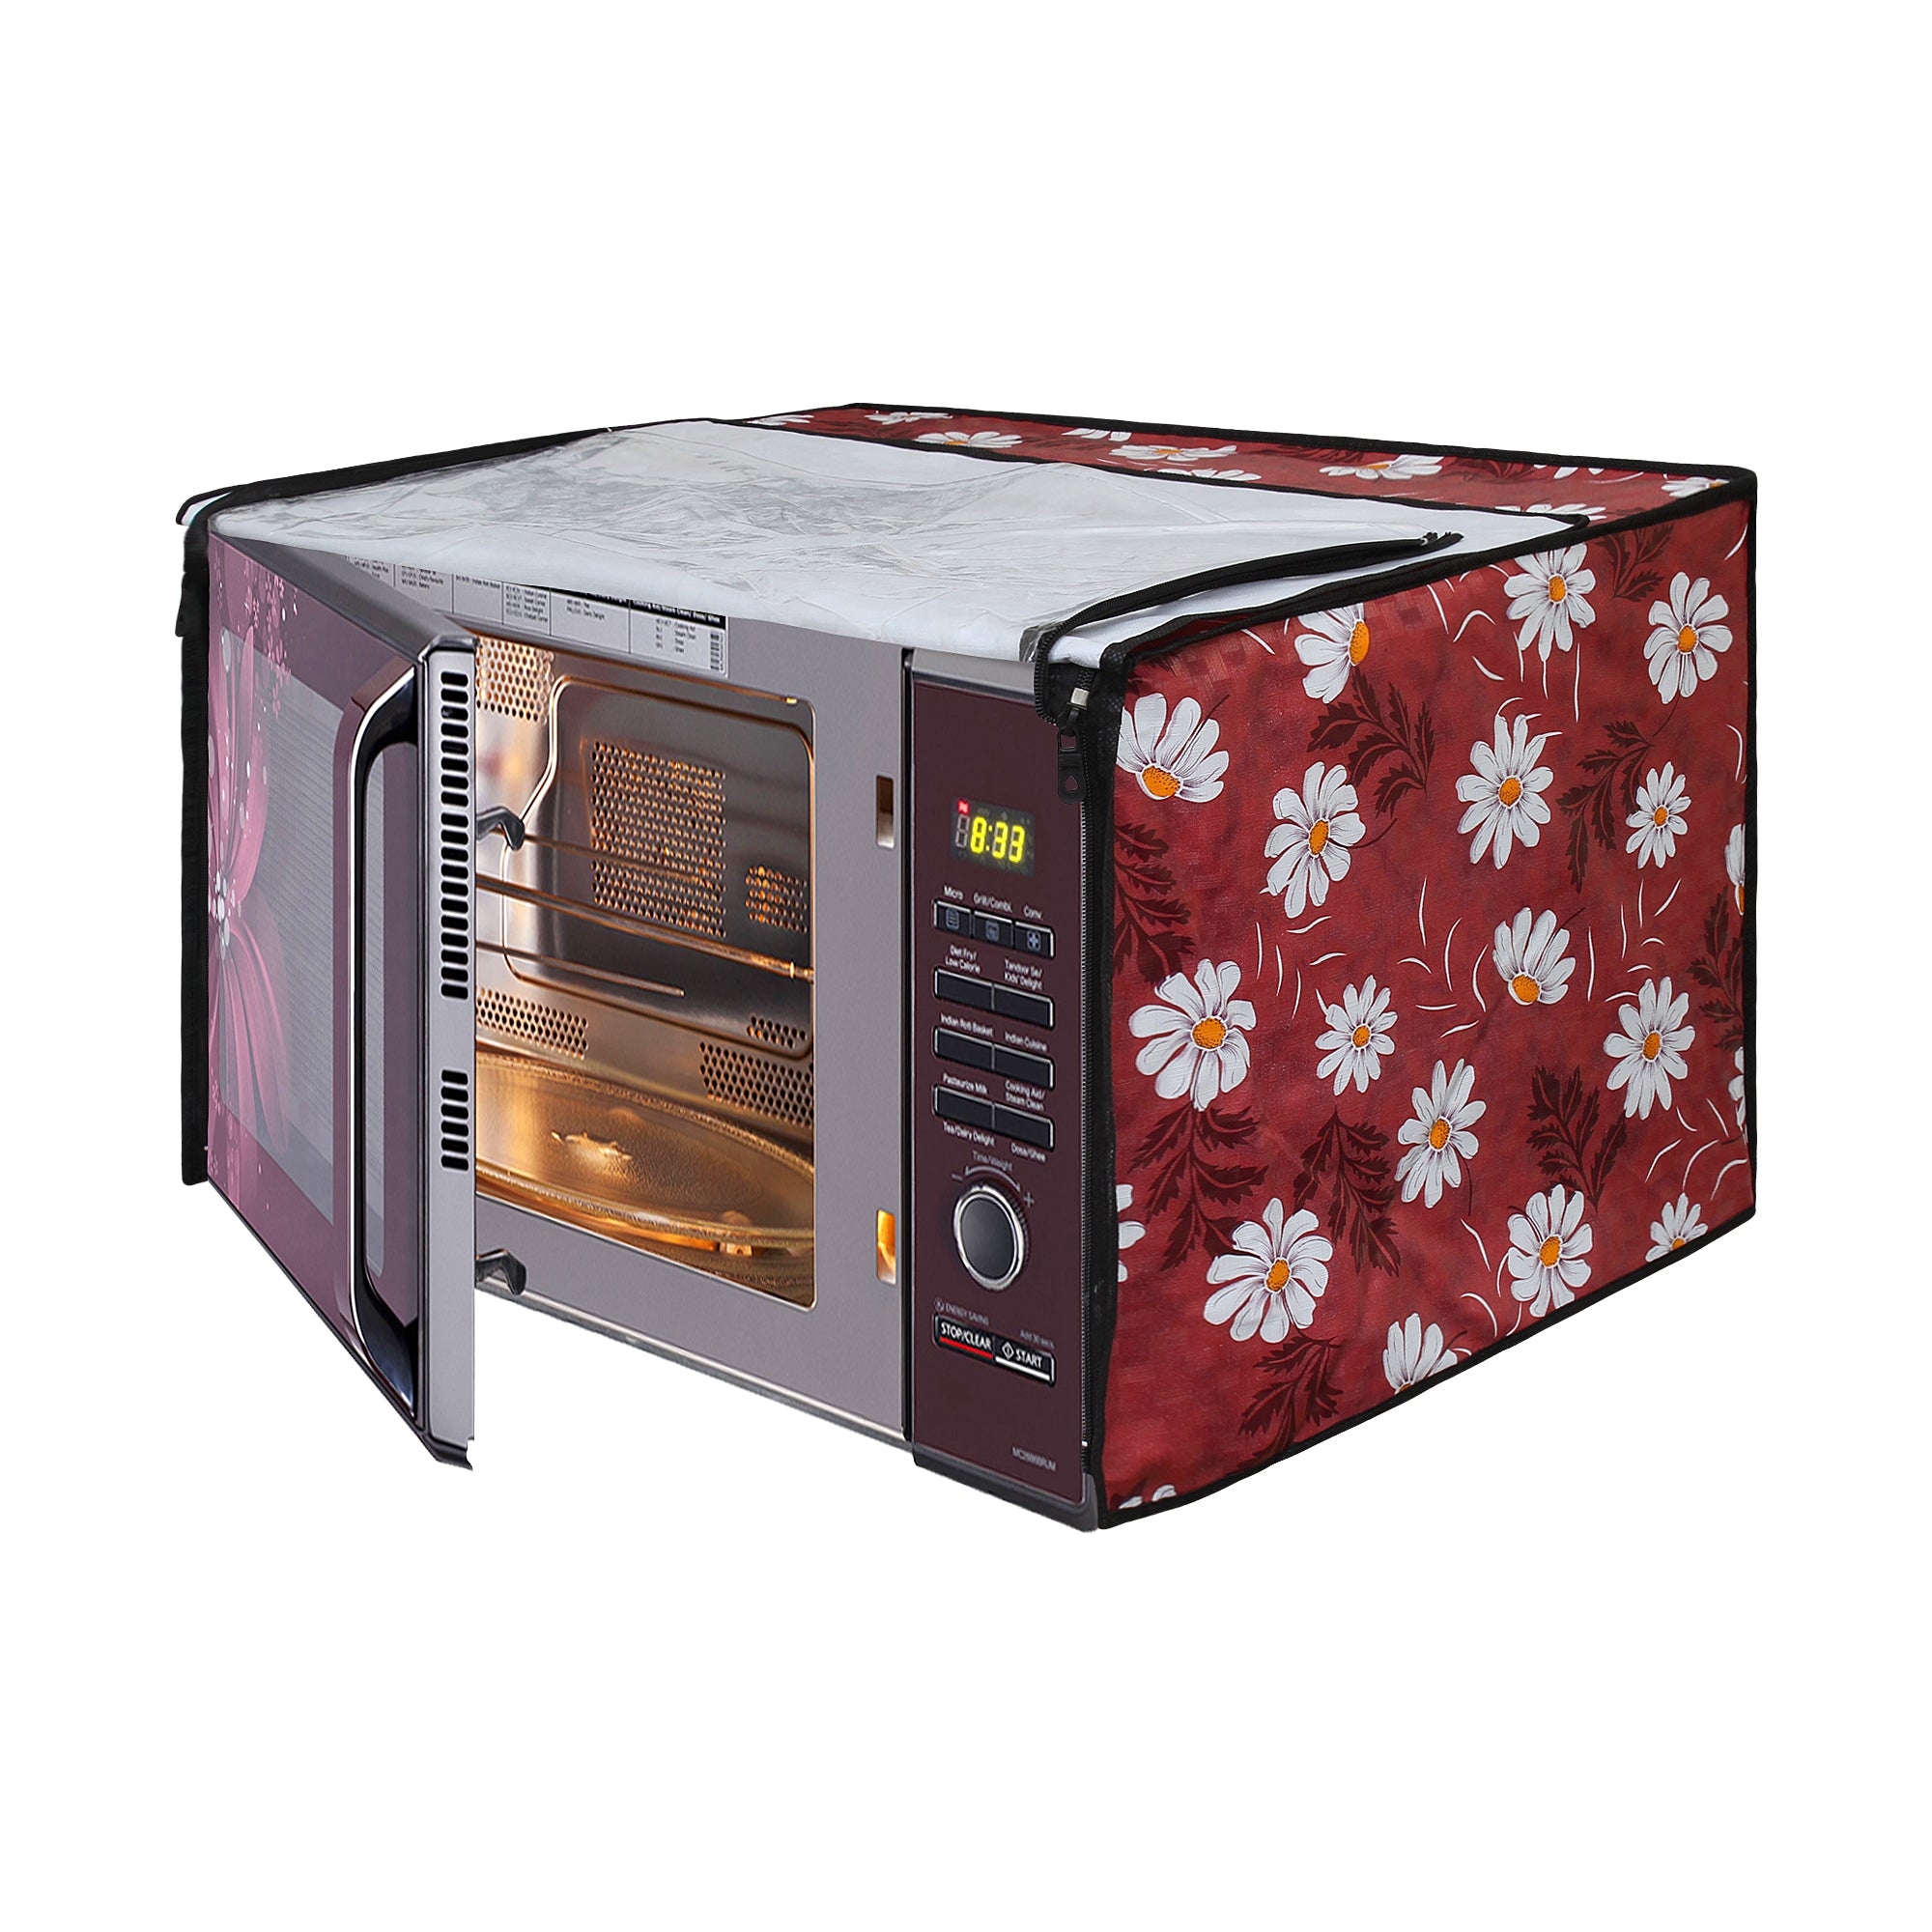 Microwave Oven Cover With Adjustable Front Zipper, SA08 - Dream Care Furnishings Private Limited